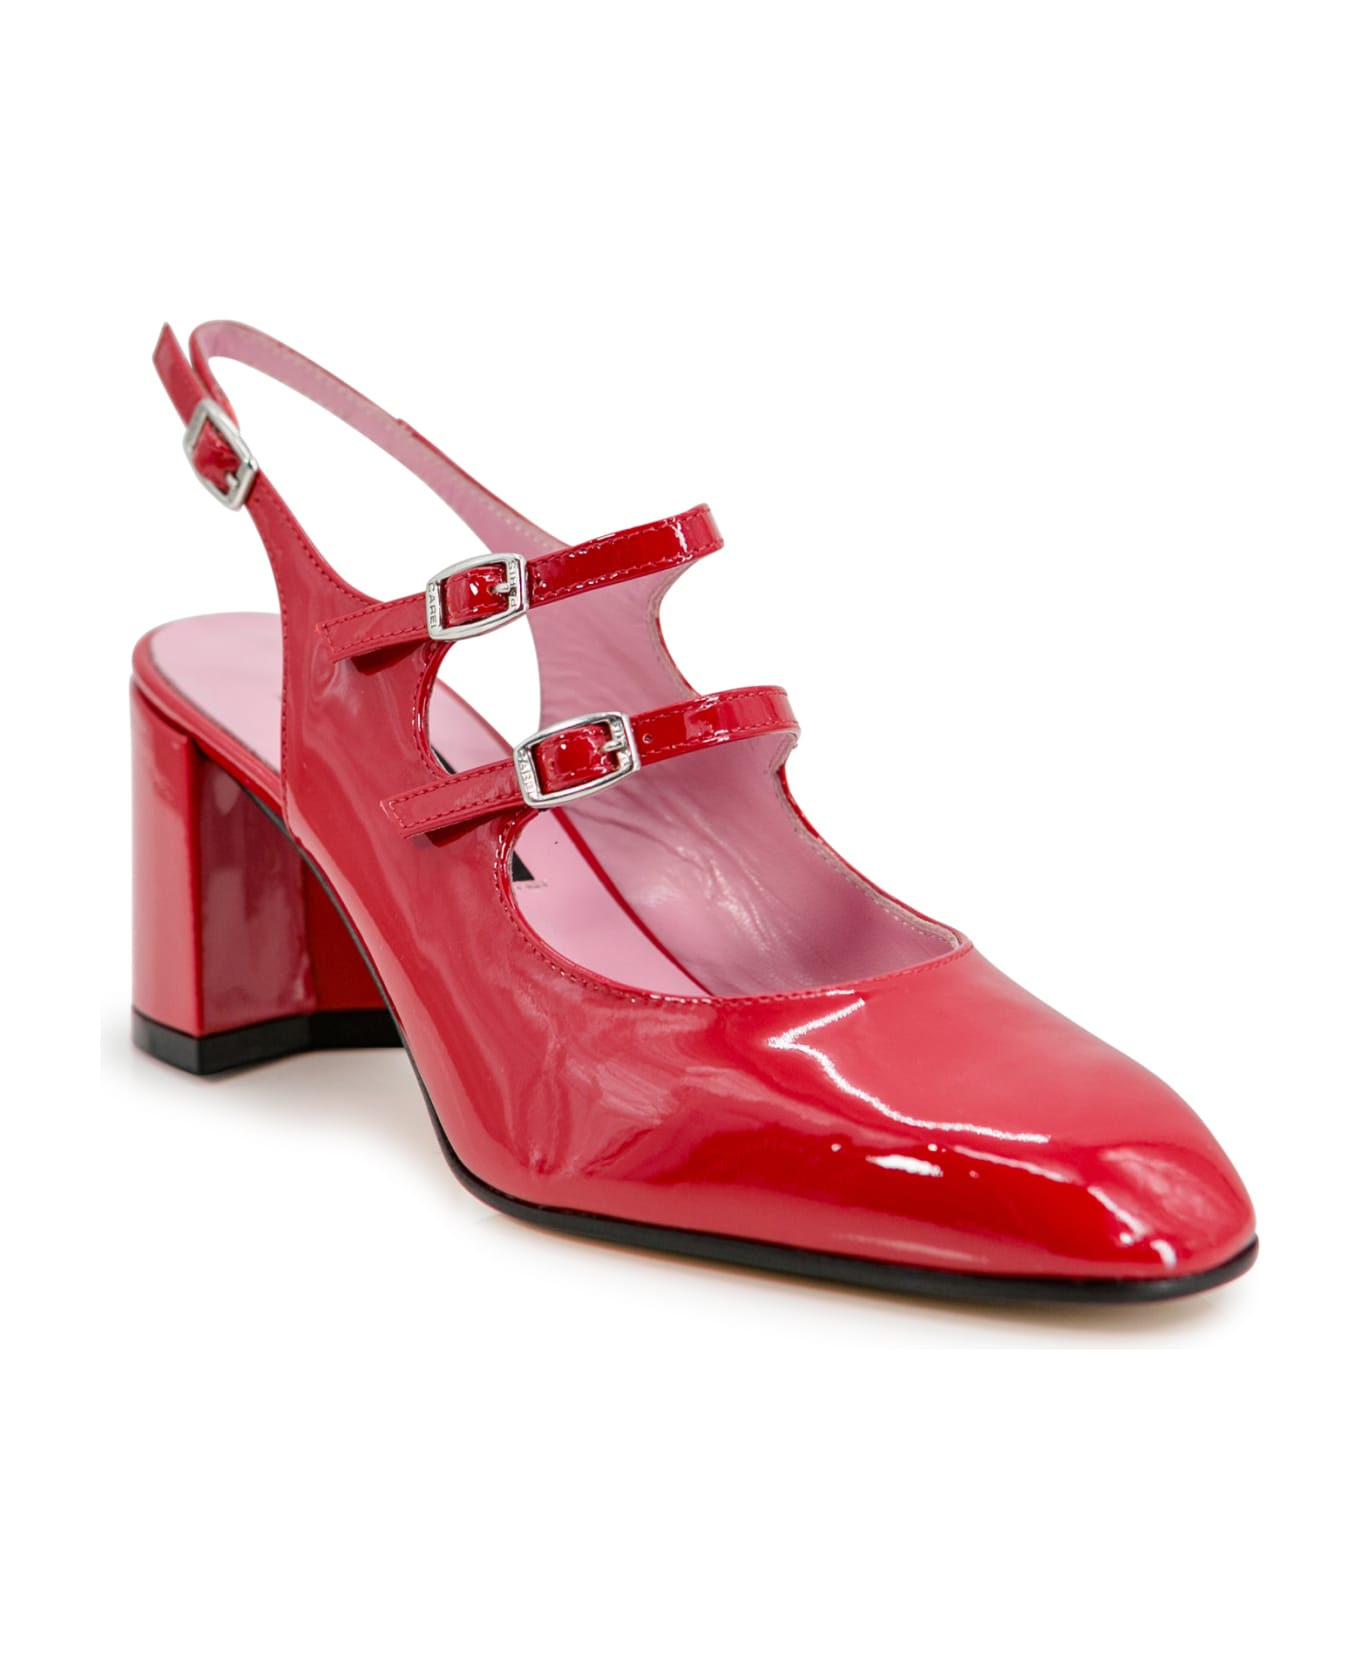 Carel 70mm Patent Leather Pumps - Red ハイヒール